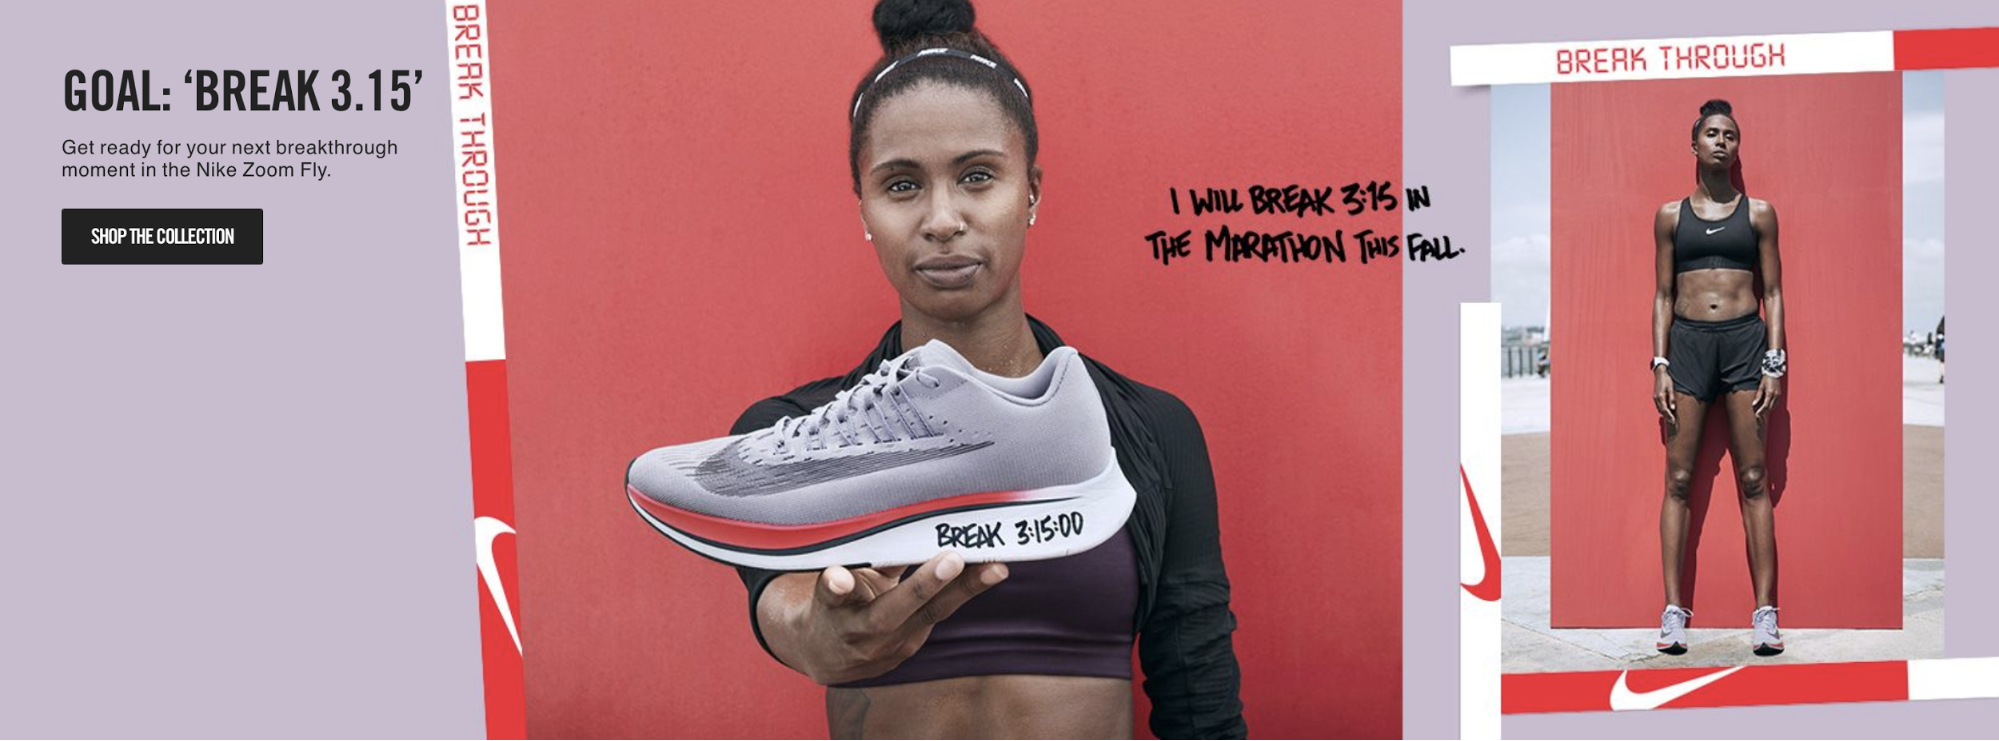 Nike call to action